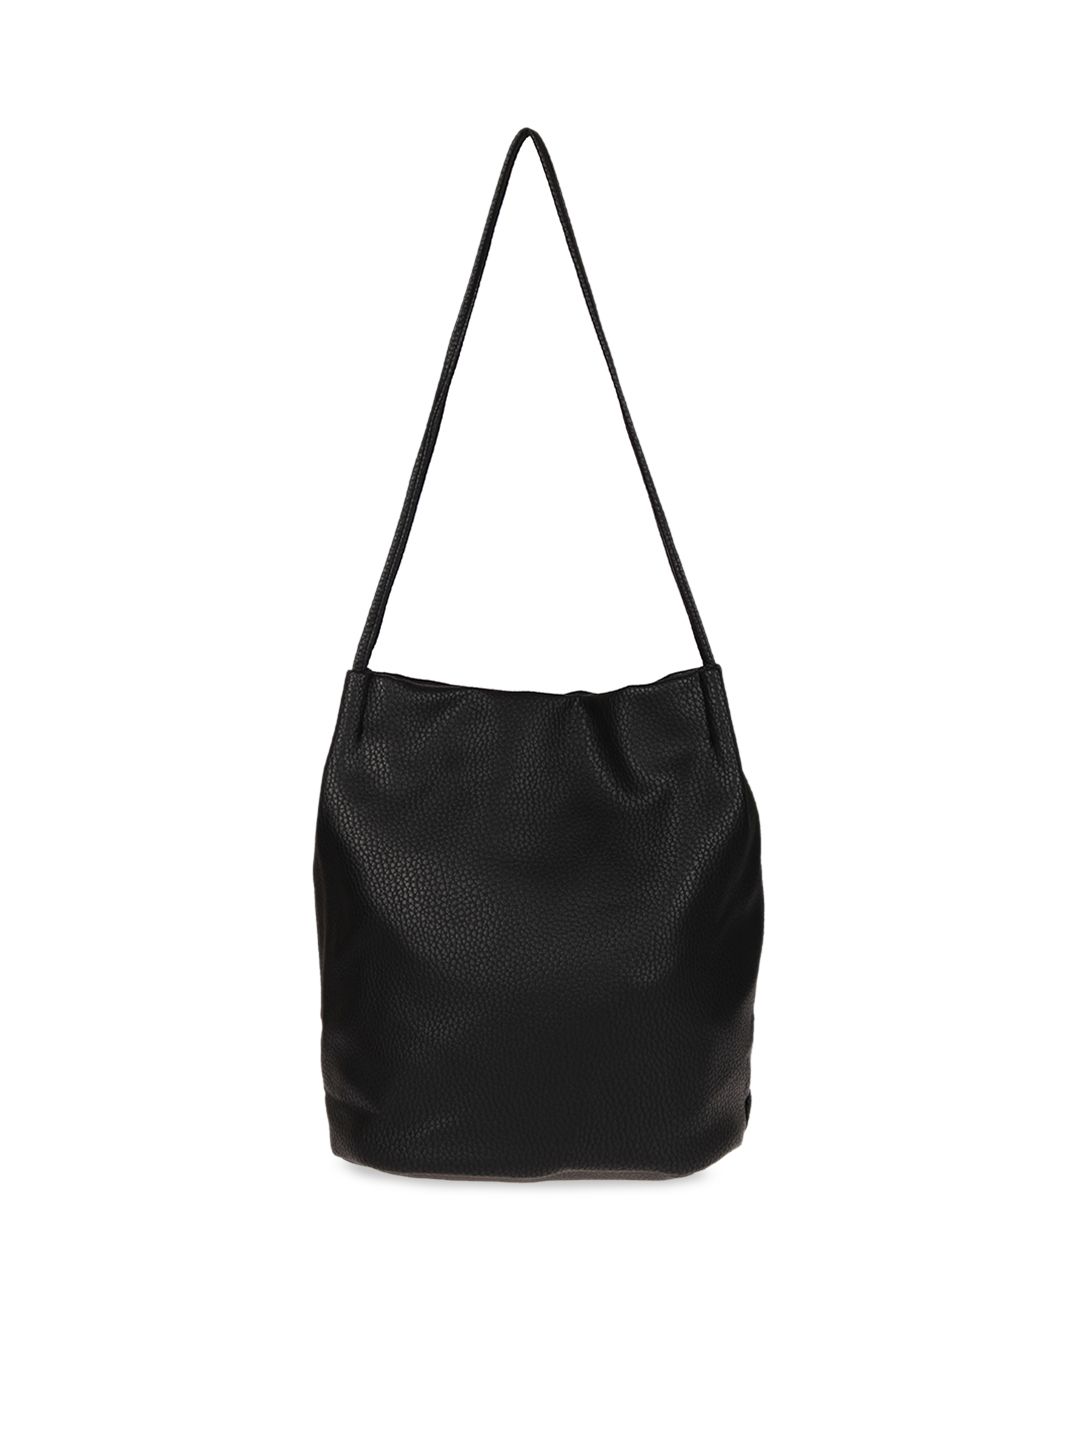 red pout Black Solid Shoulder Bag Price in India